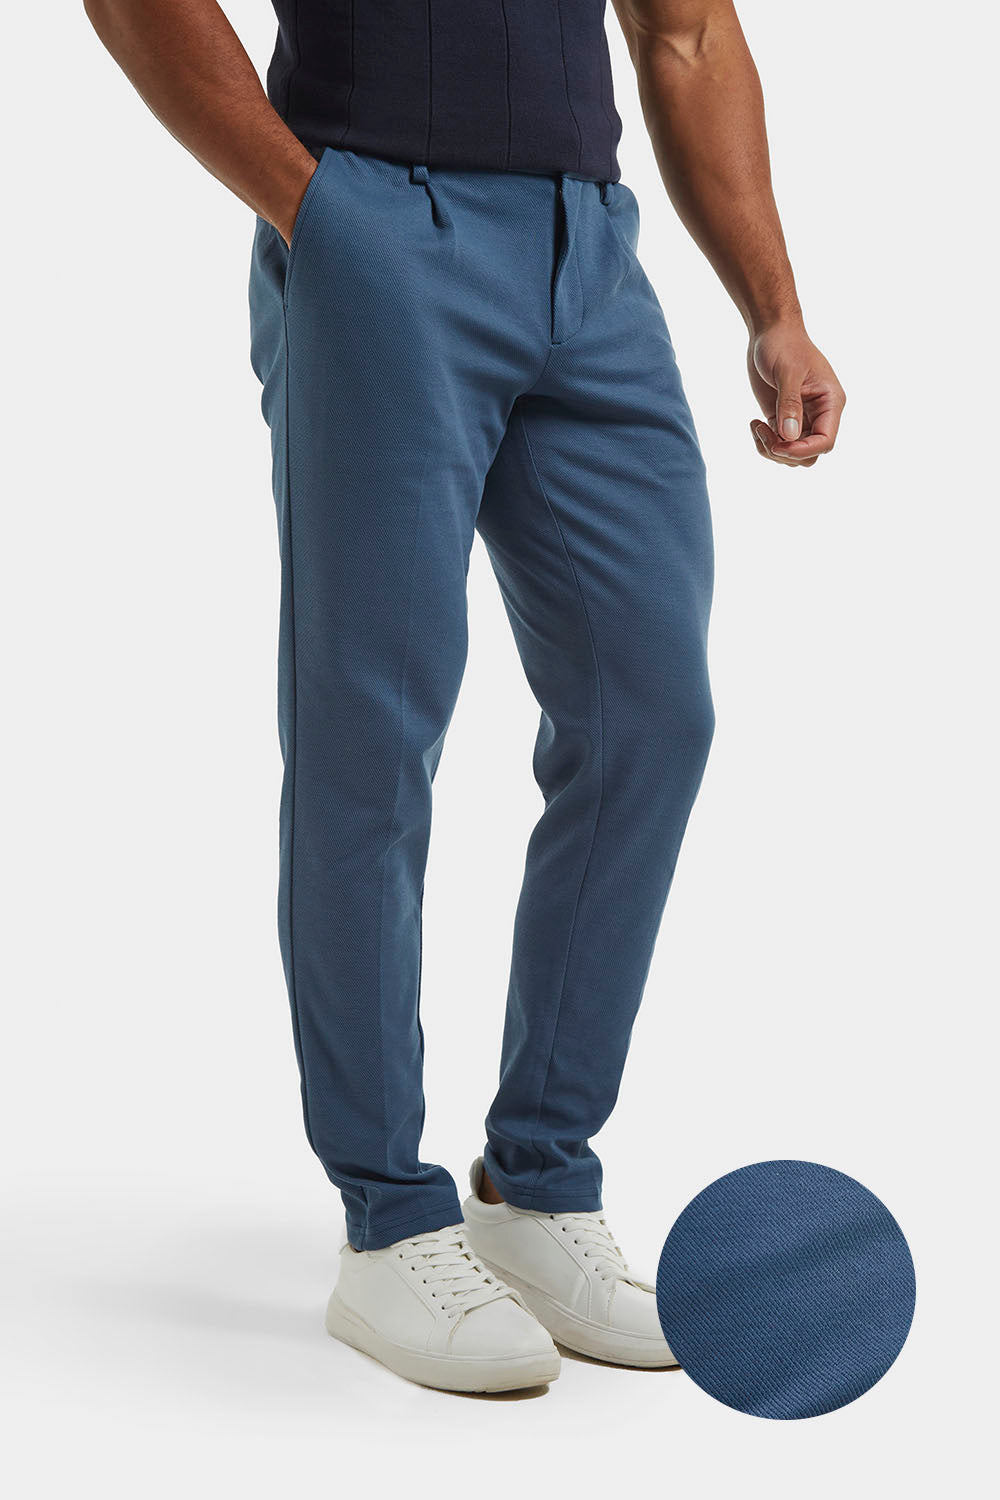 Buy Regular Fit Men Chinos Navy Blue Solid Poly Cotton Blend for Best  Price, Reviews, Free Shipping